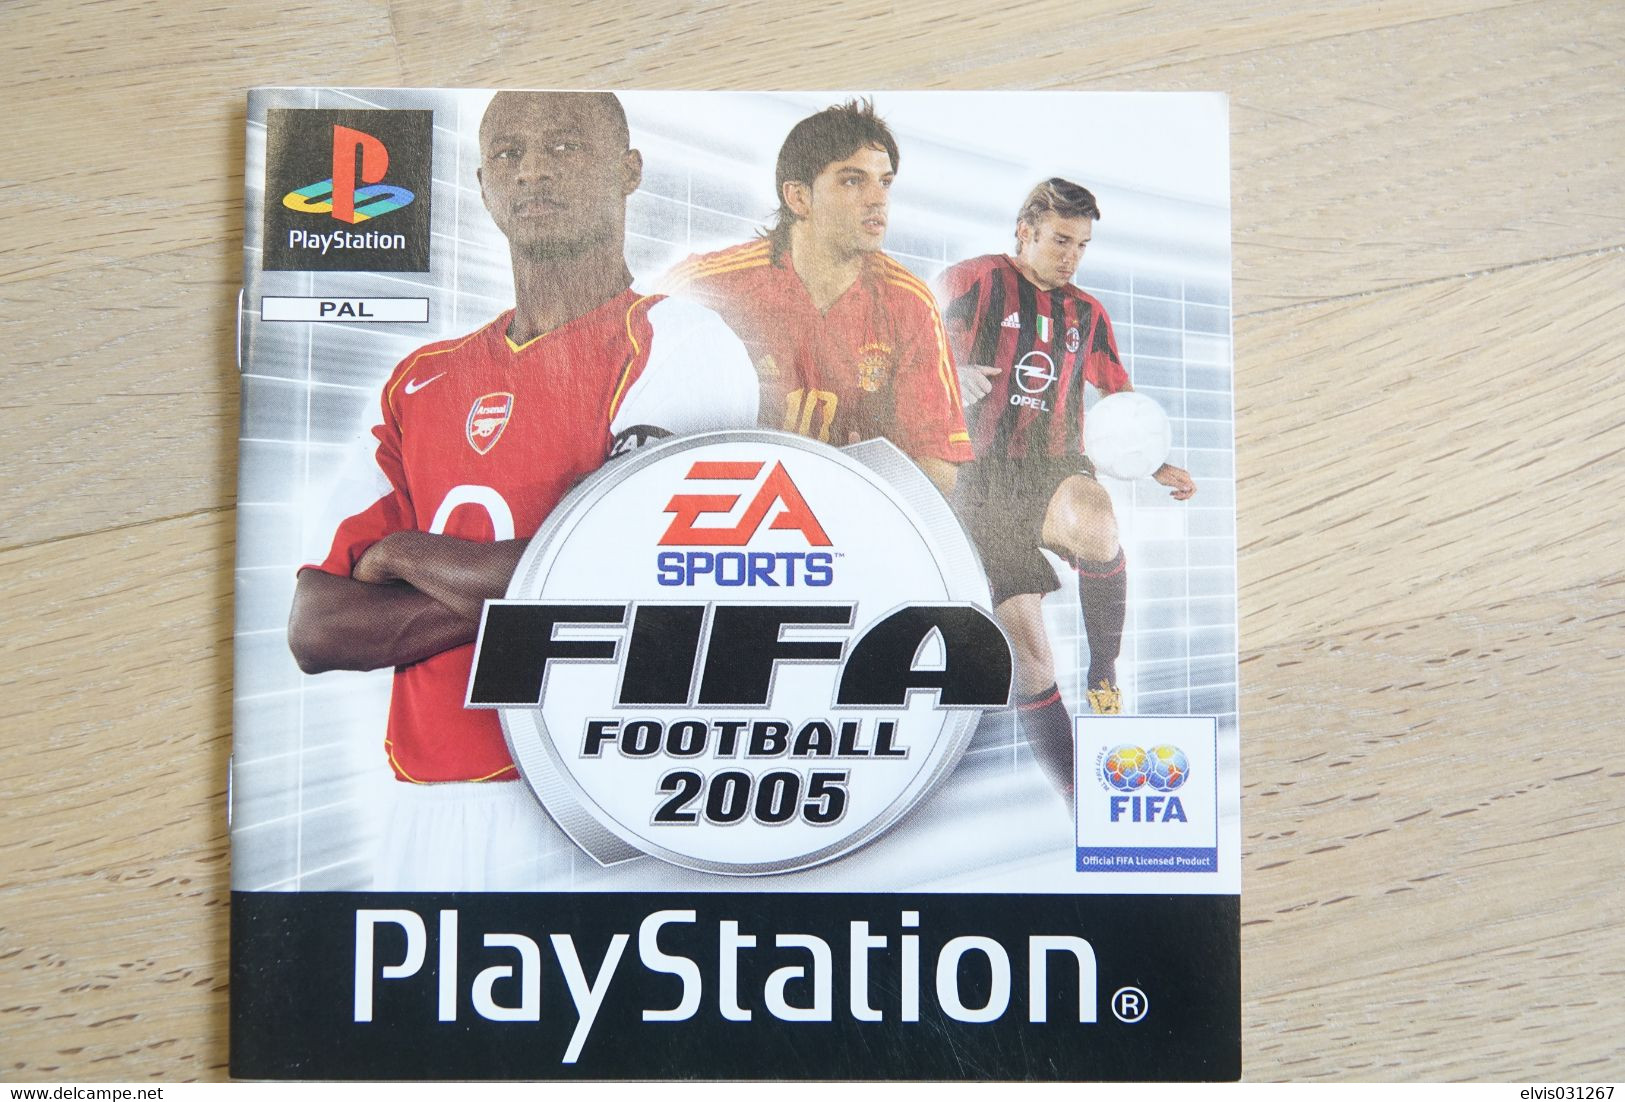 SONY PLAYSTATION ONE PS1 : MANUAL : FIFA 2005 - PAL - Literature & Instructions